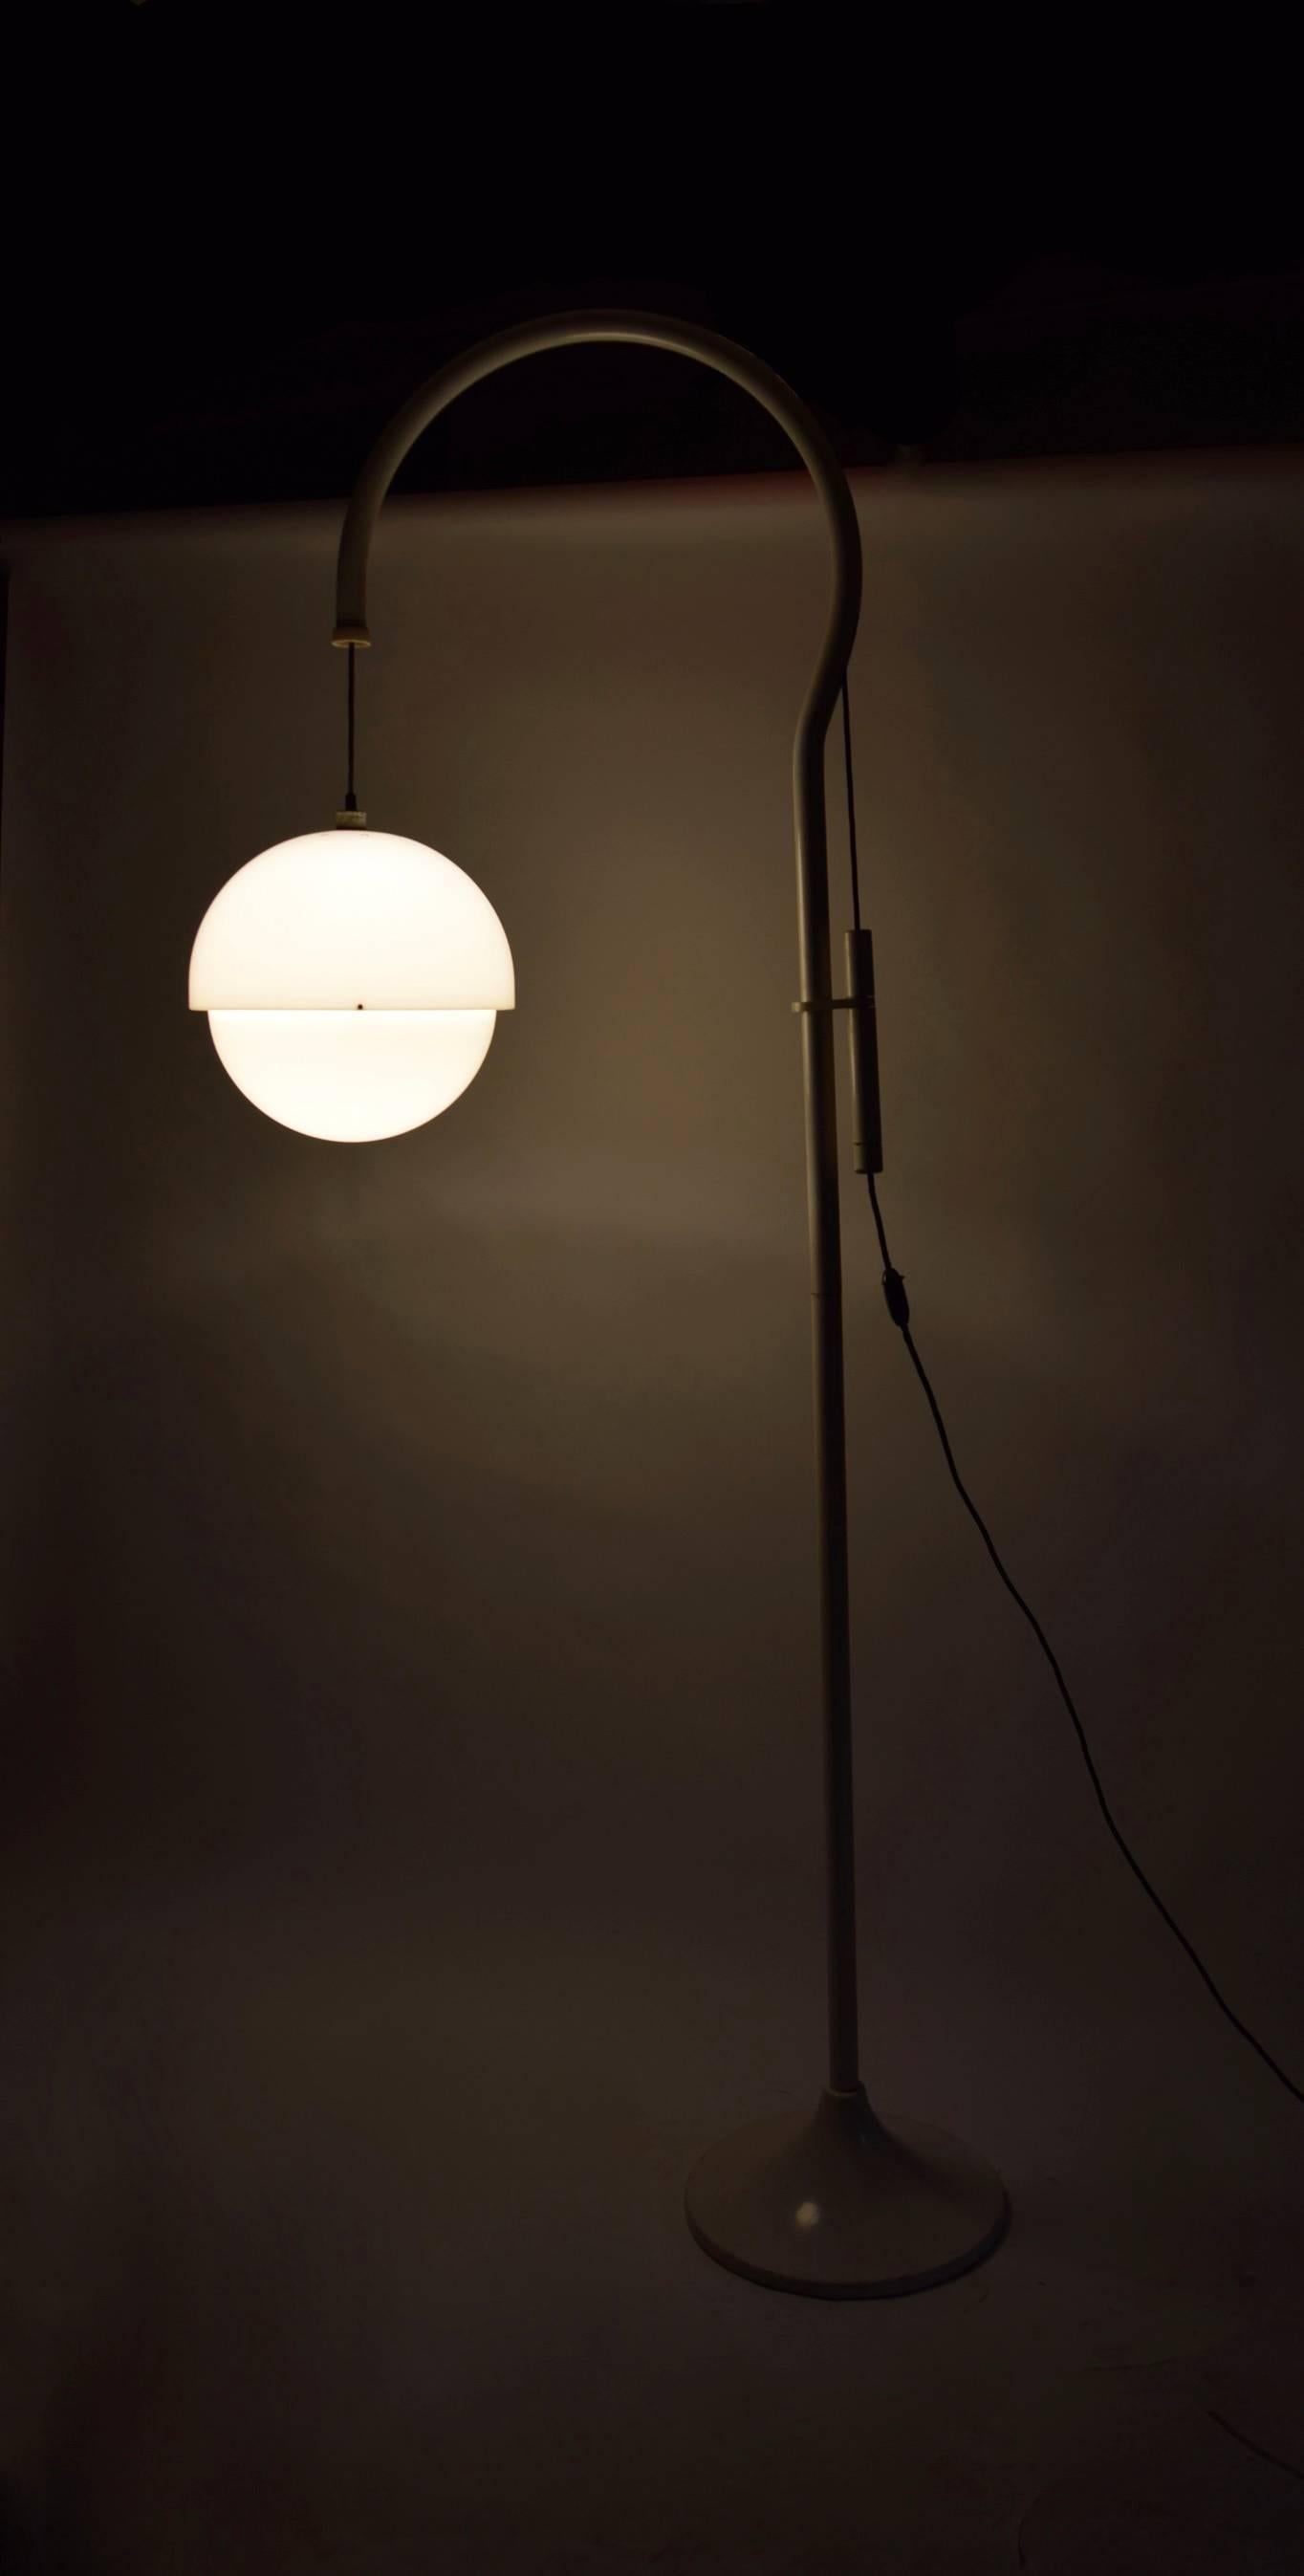 Mid-20th Century Floor Lamp Designed by Luigi Bandini Buti for Kartell in 1967, Made in Italy For Sale